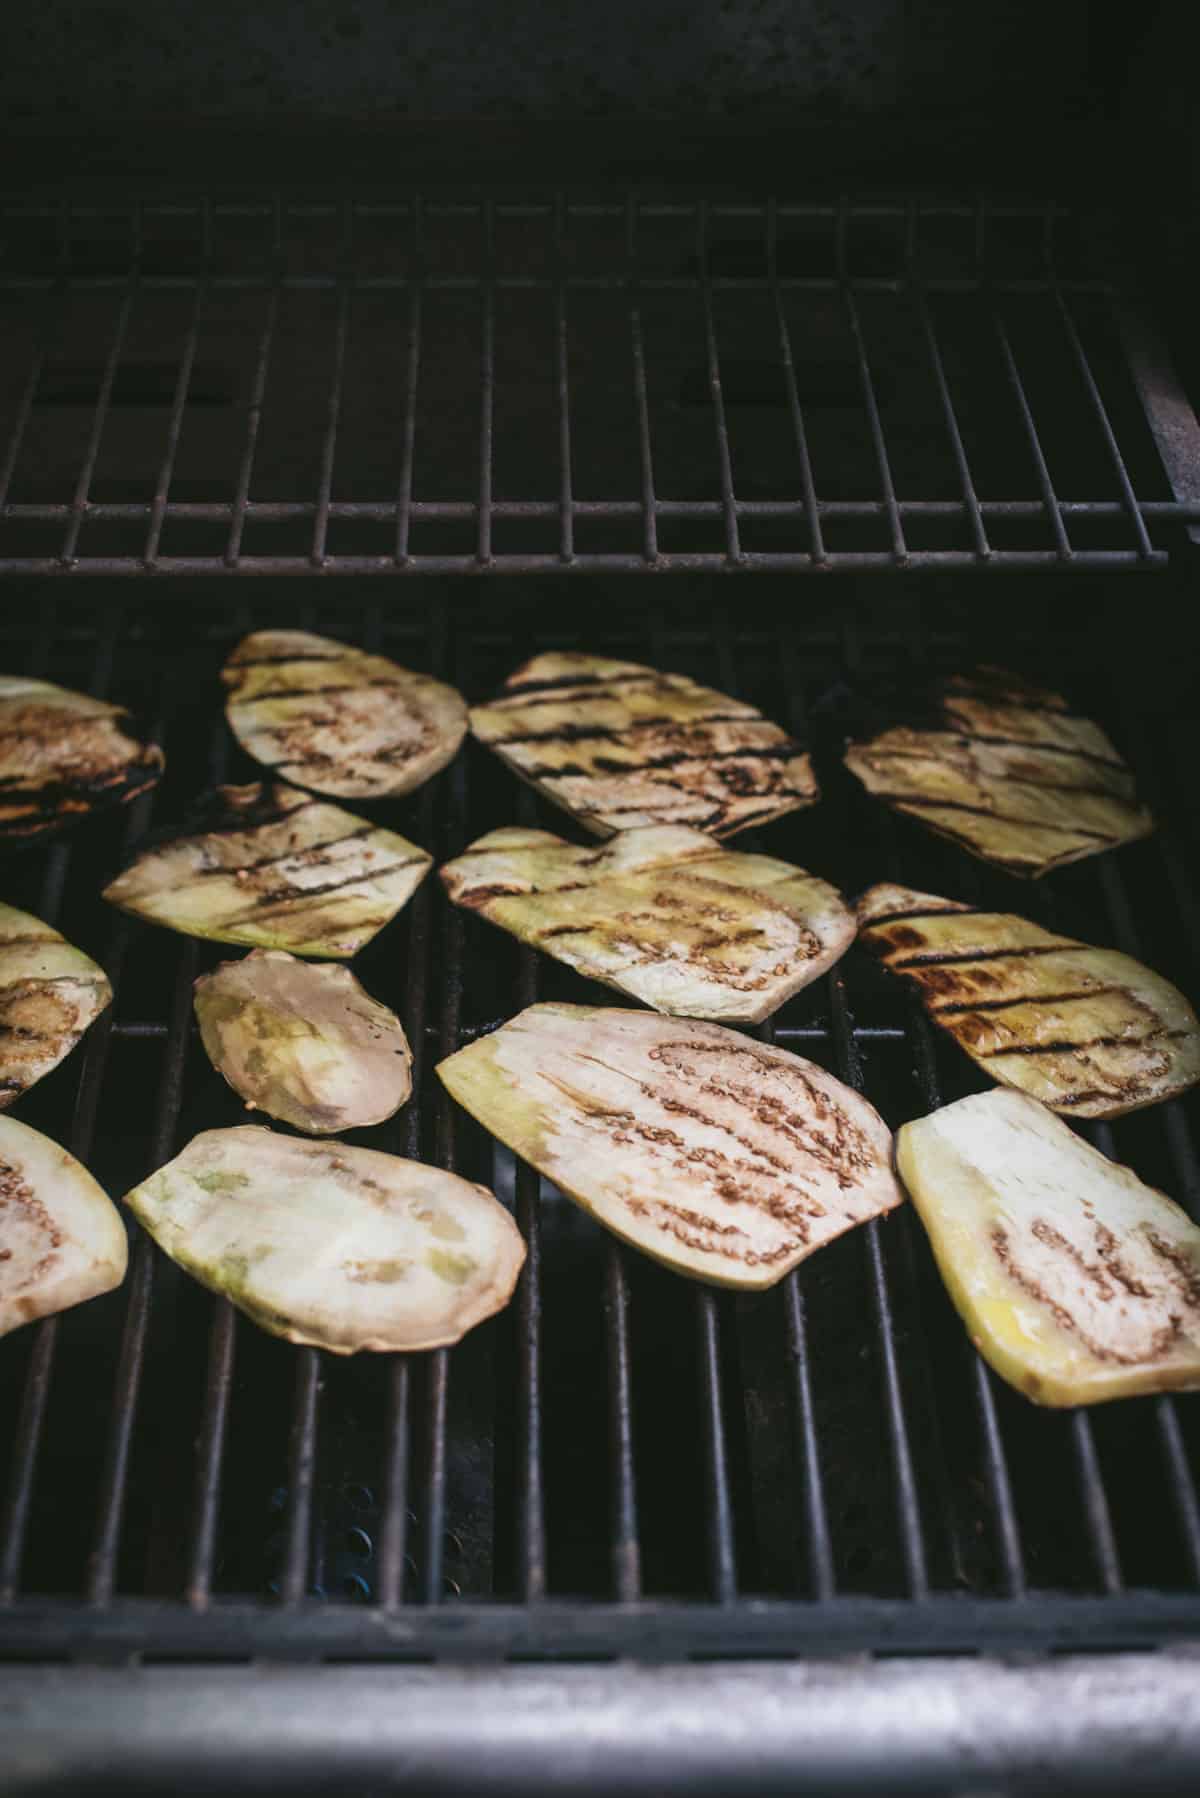 The eggplant slices are sitting on a bare grill to cook. They are nicely spread out and they look nearly finished. There is beautiful charred lines across the eggplant.